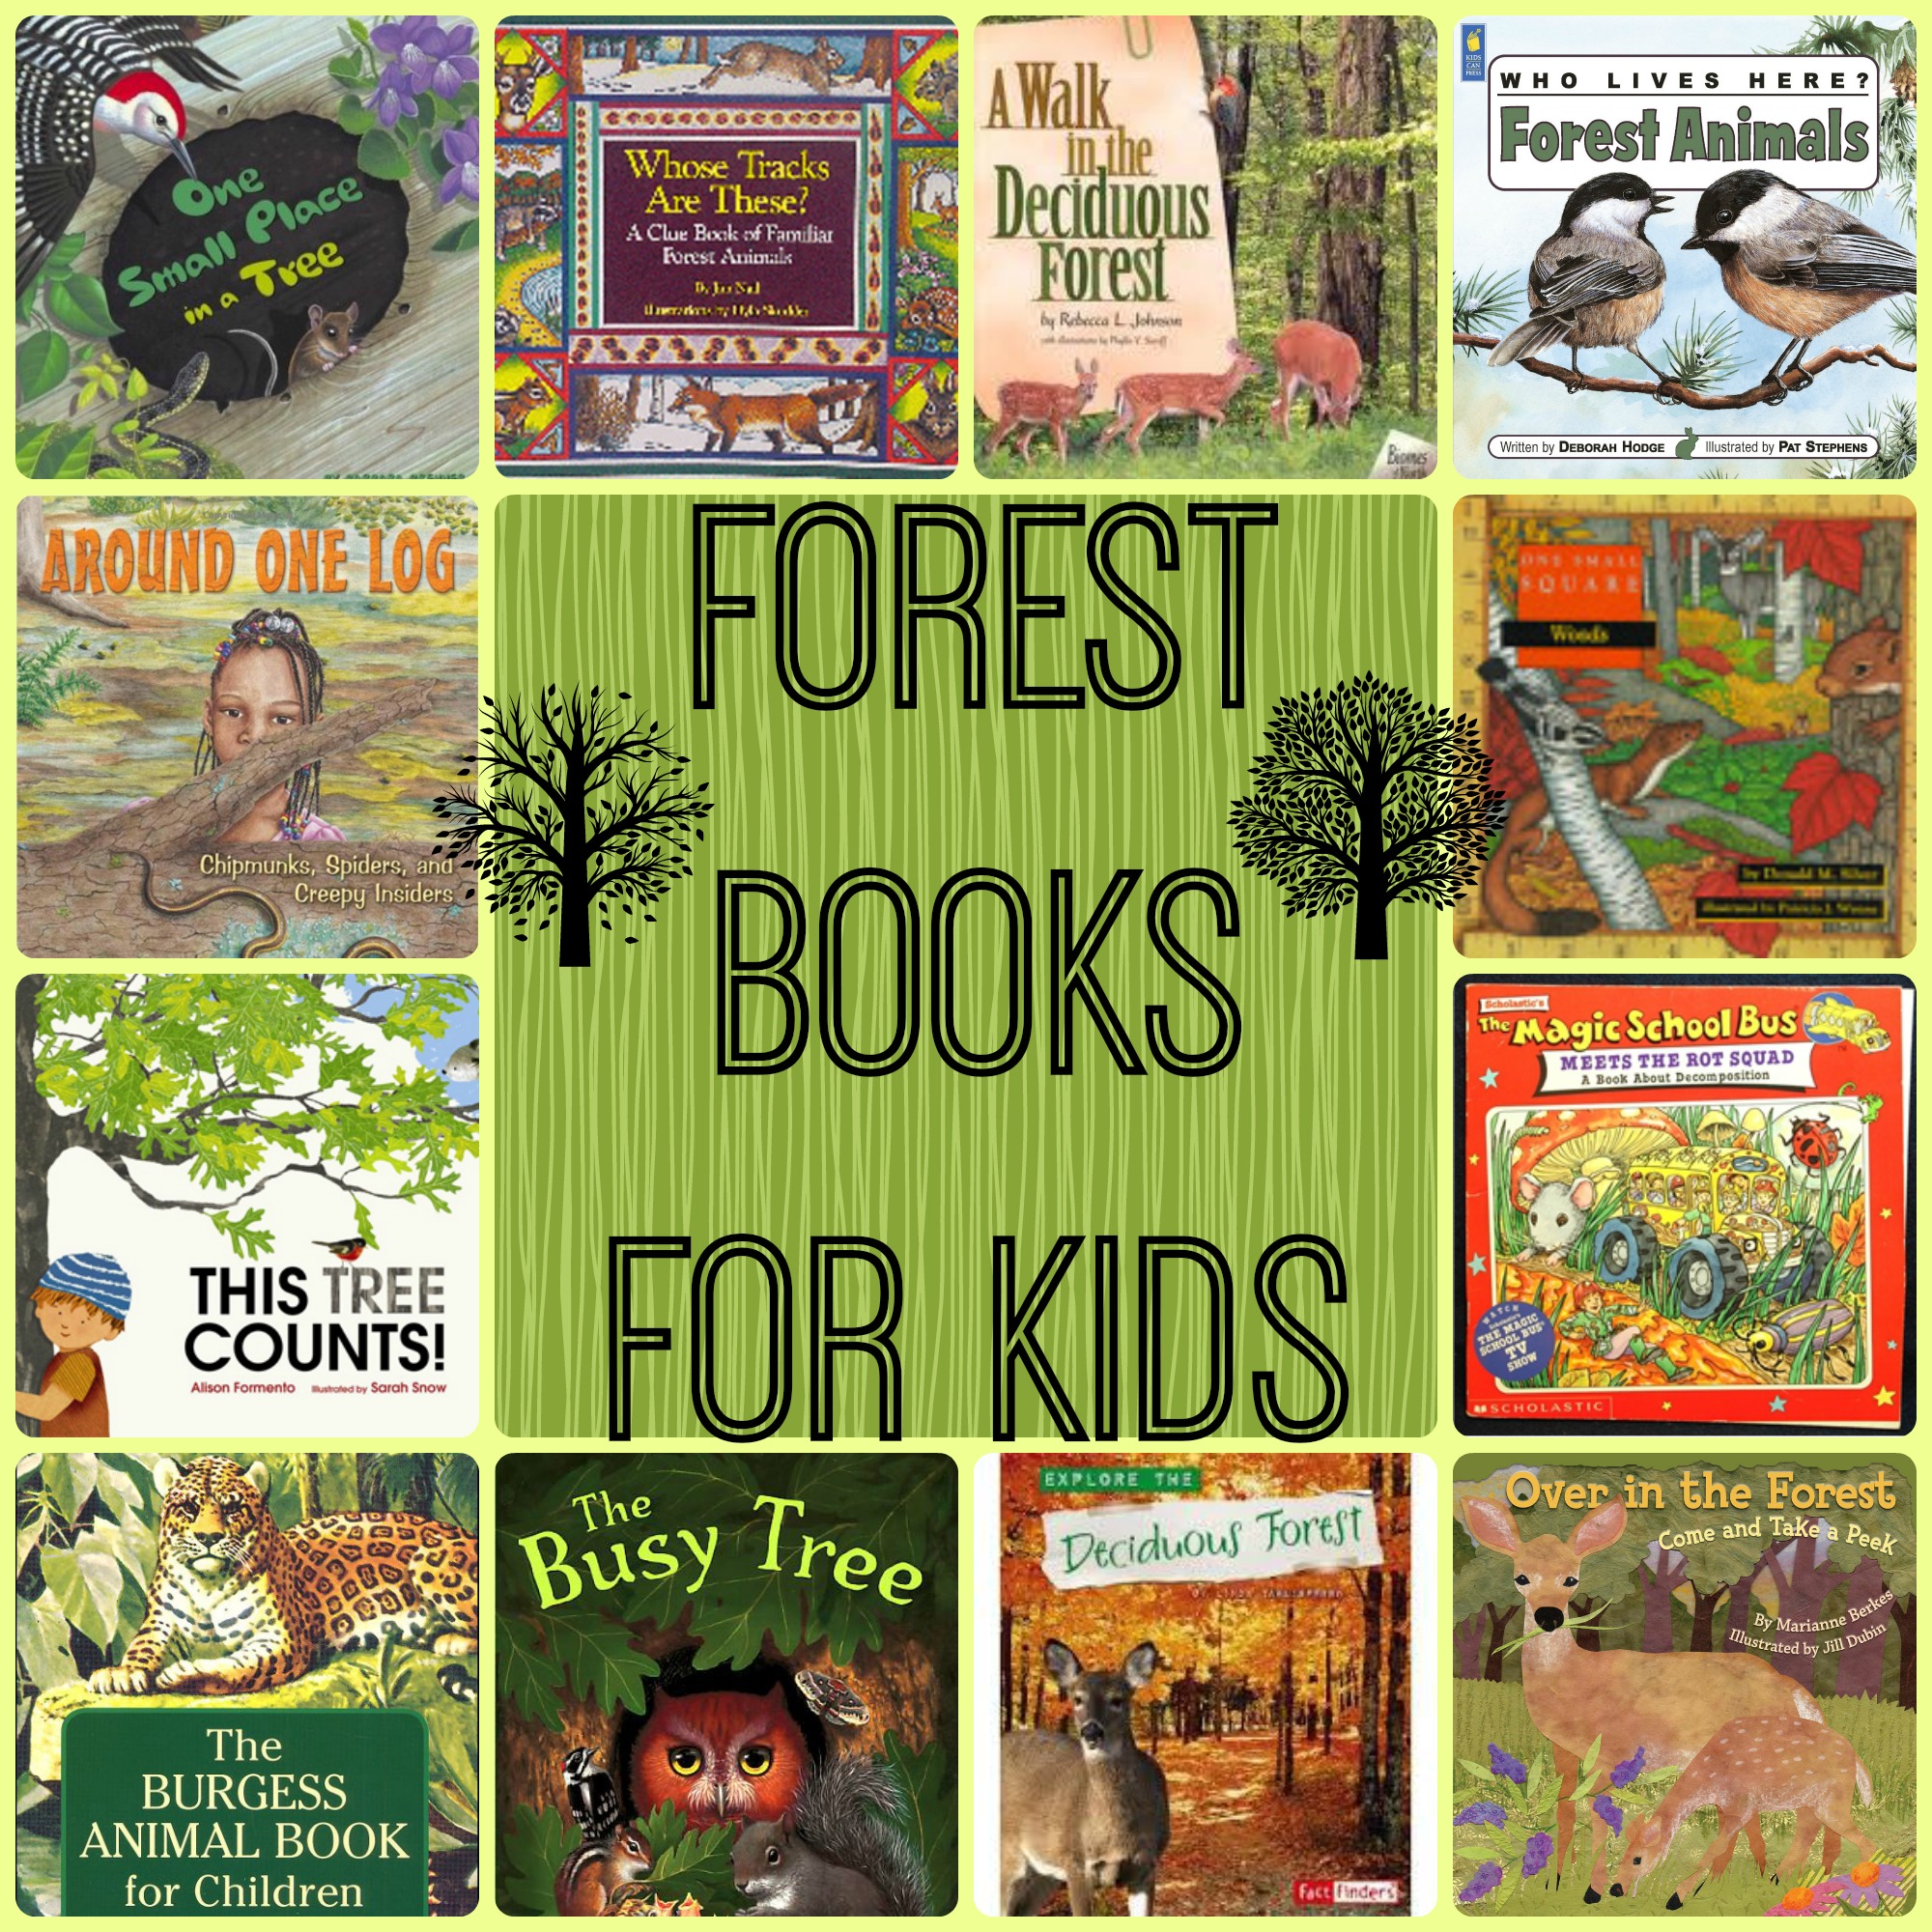 Pin By Esther Suarez On Rta Woodlands Forest Book Forest School Preschool Books